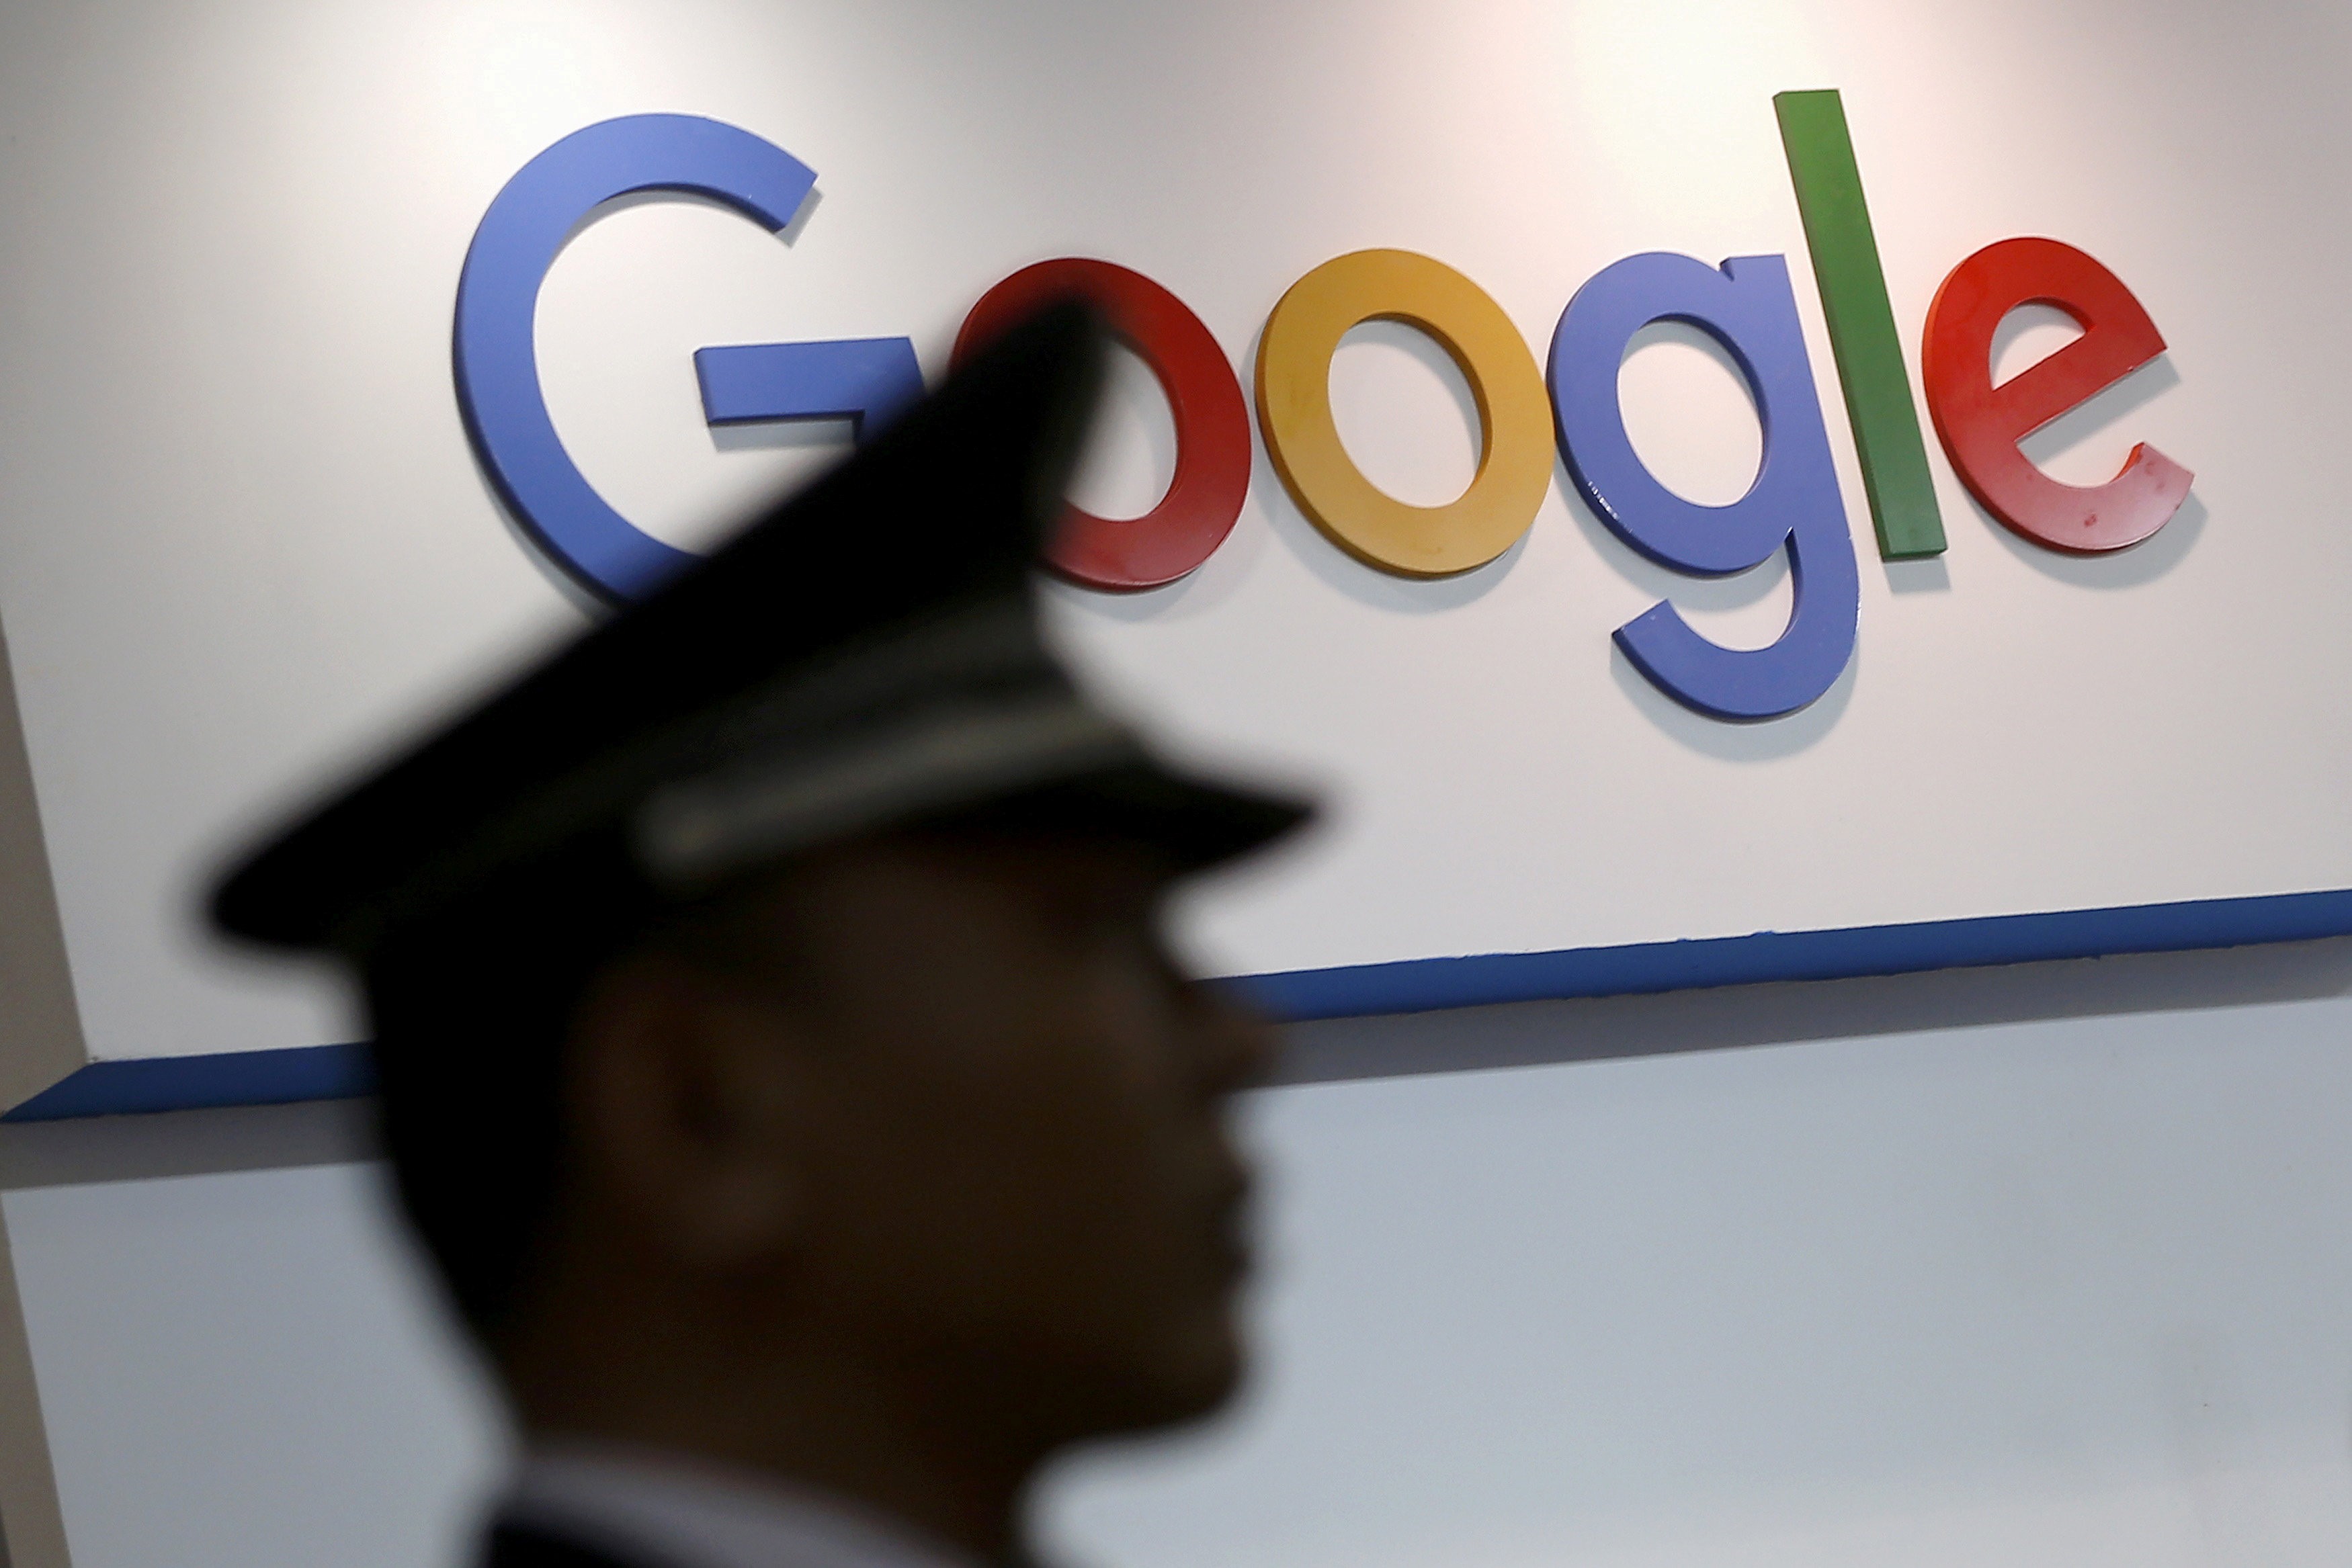 Speculation on the US internet giant’s return has centred on its reported development of mobile search and news aggregation apps designed to meet China’s strict censorship laws